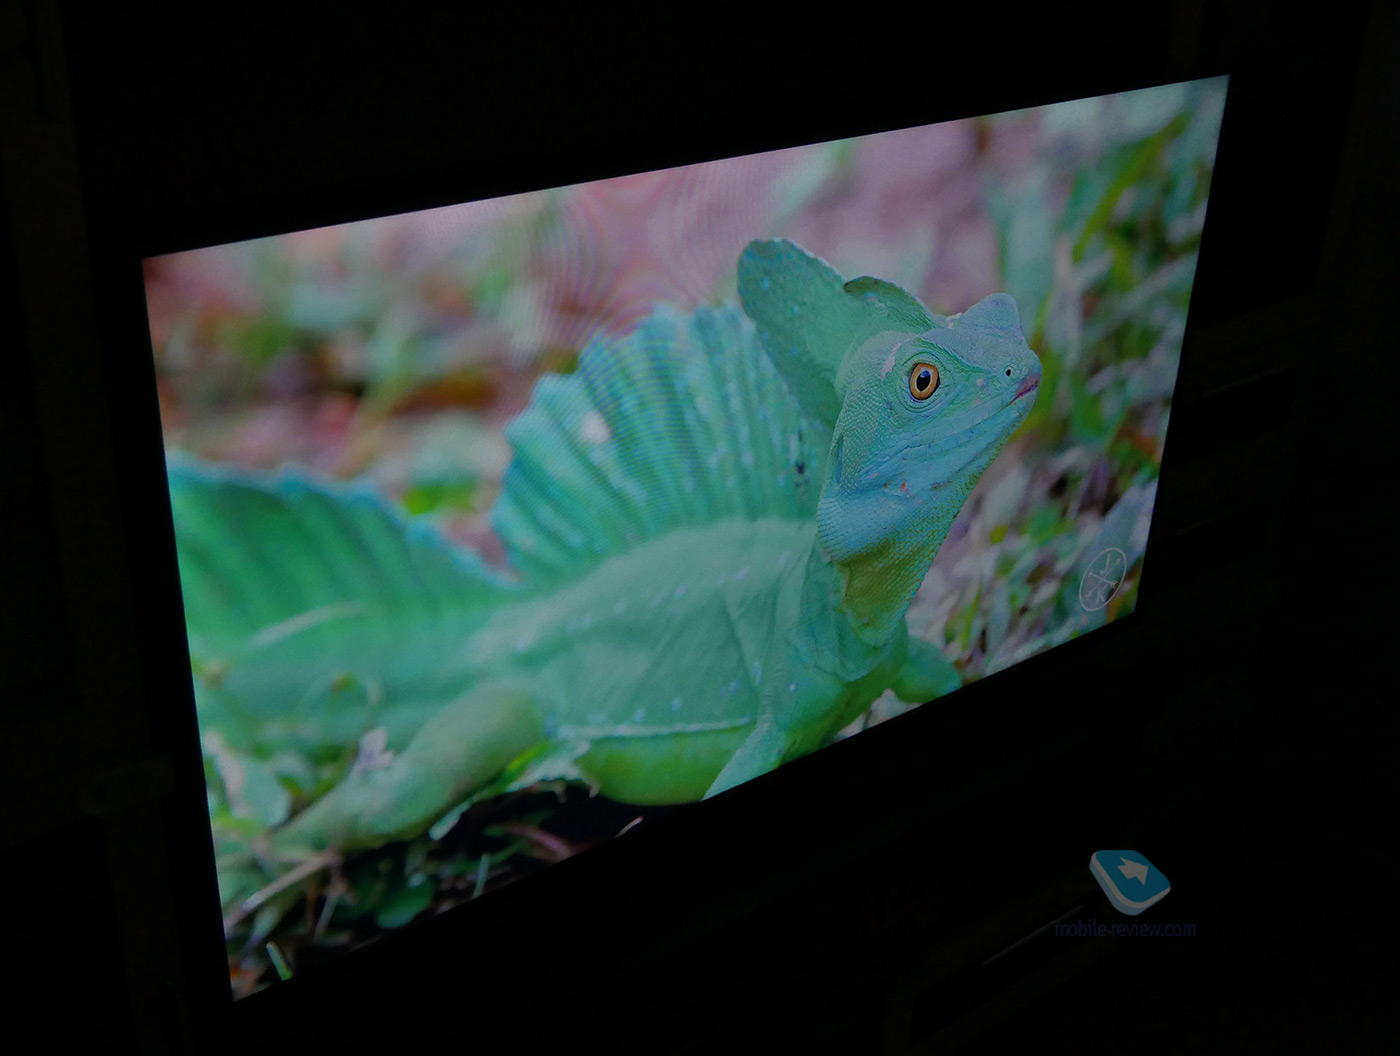 Experience of using Xiaomi Mi TV 4S at 55 inches